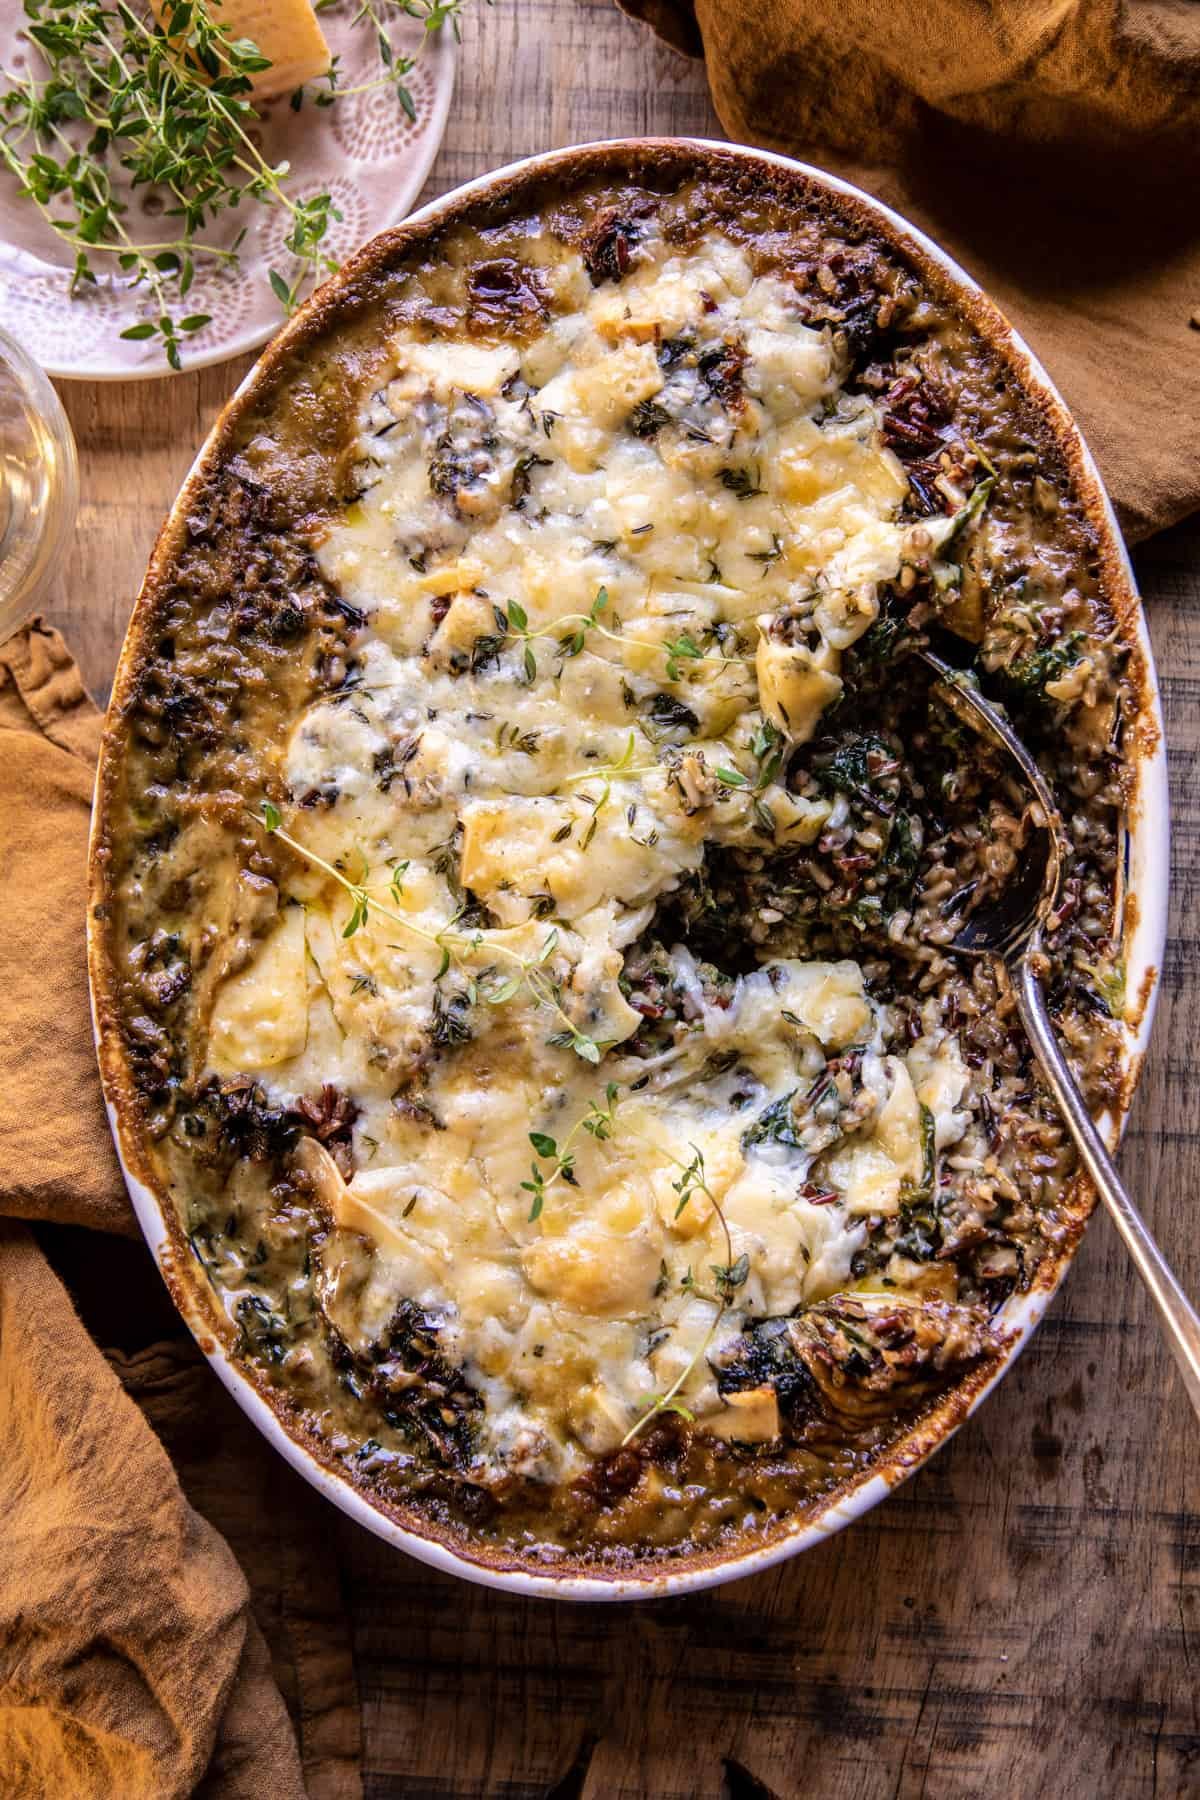 Creamed Spinach and Wild Rice Casserole